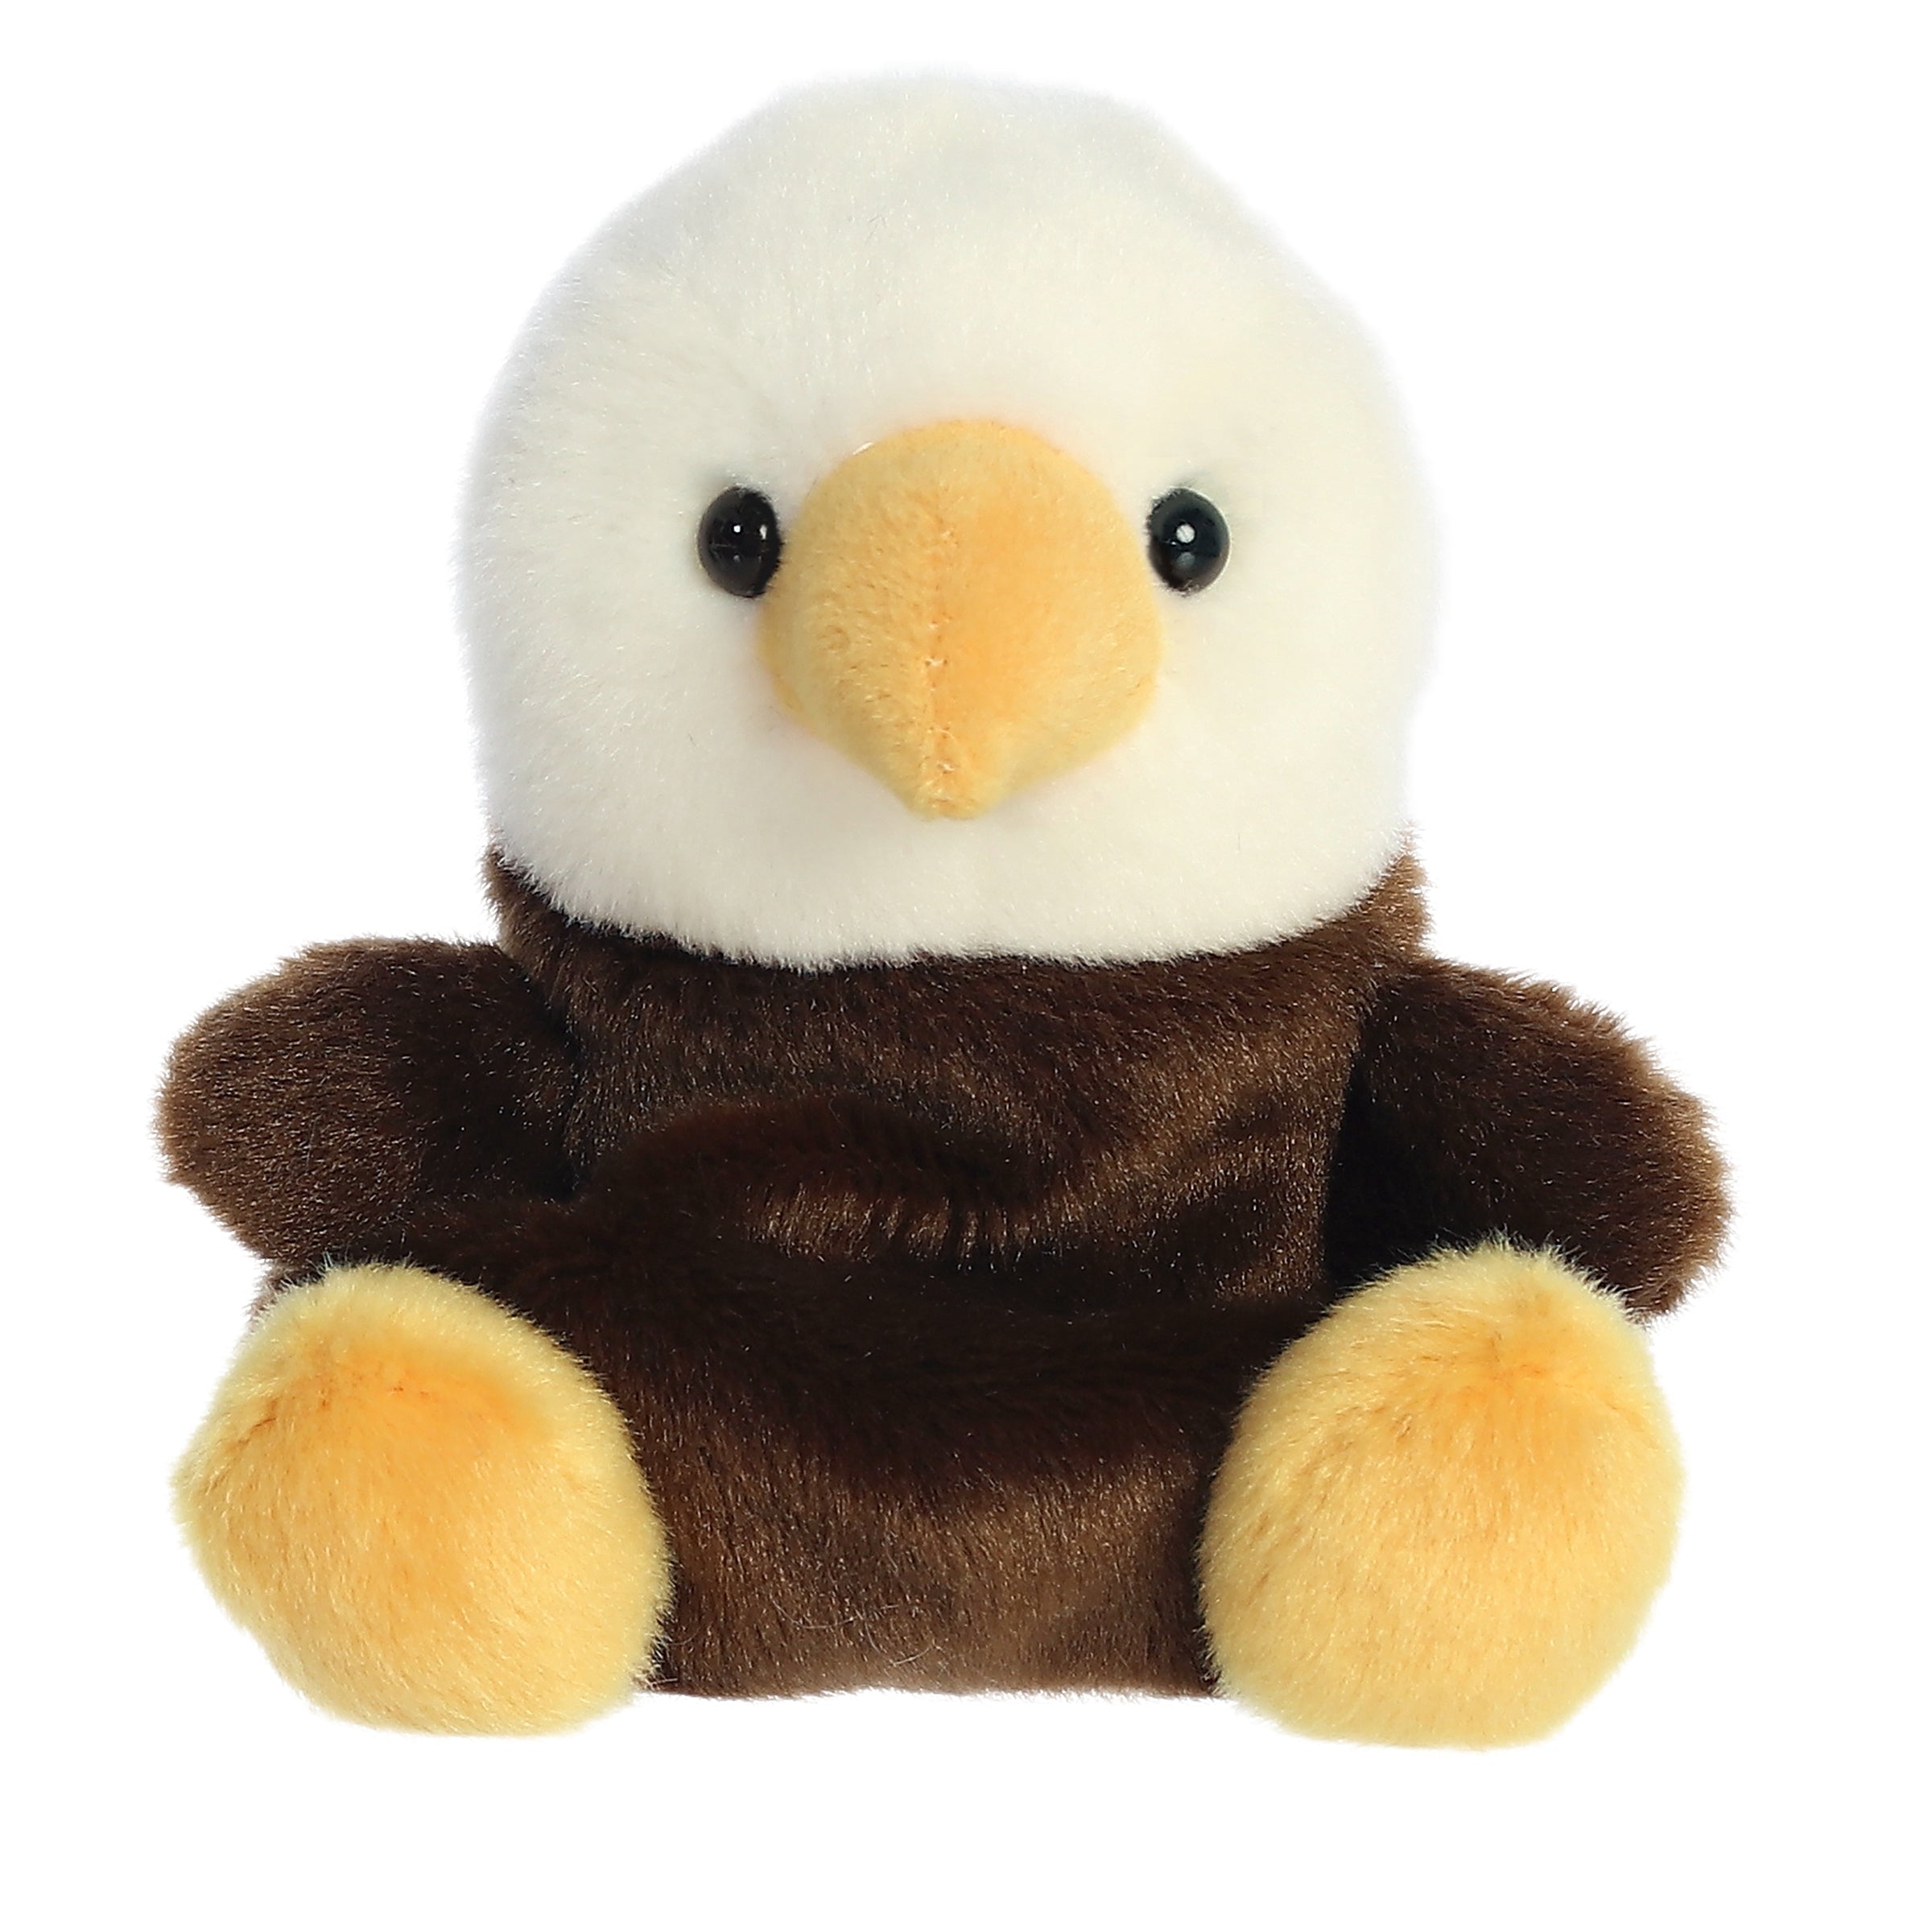 Murphy Bald Eagle plush toy from Palm Pals, with a brown body and yellow beak, exuding wisdom.